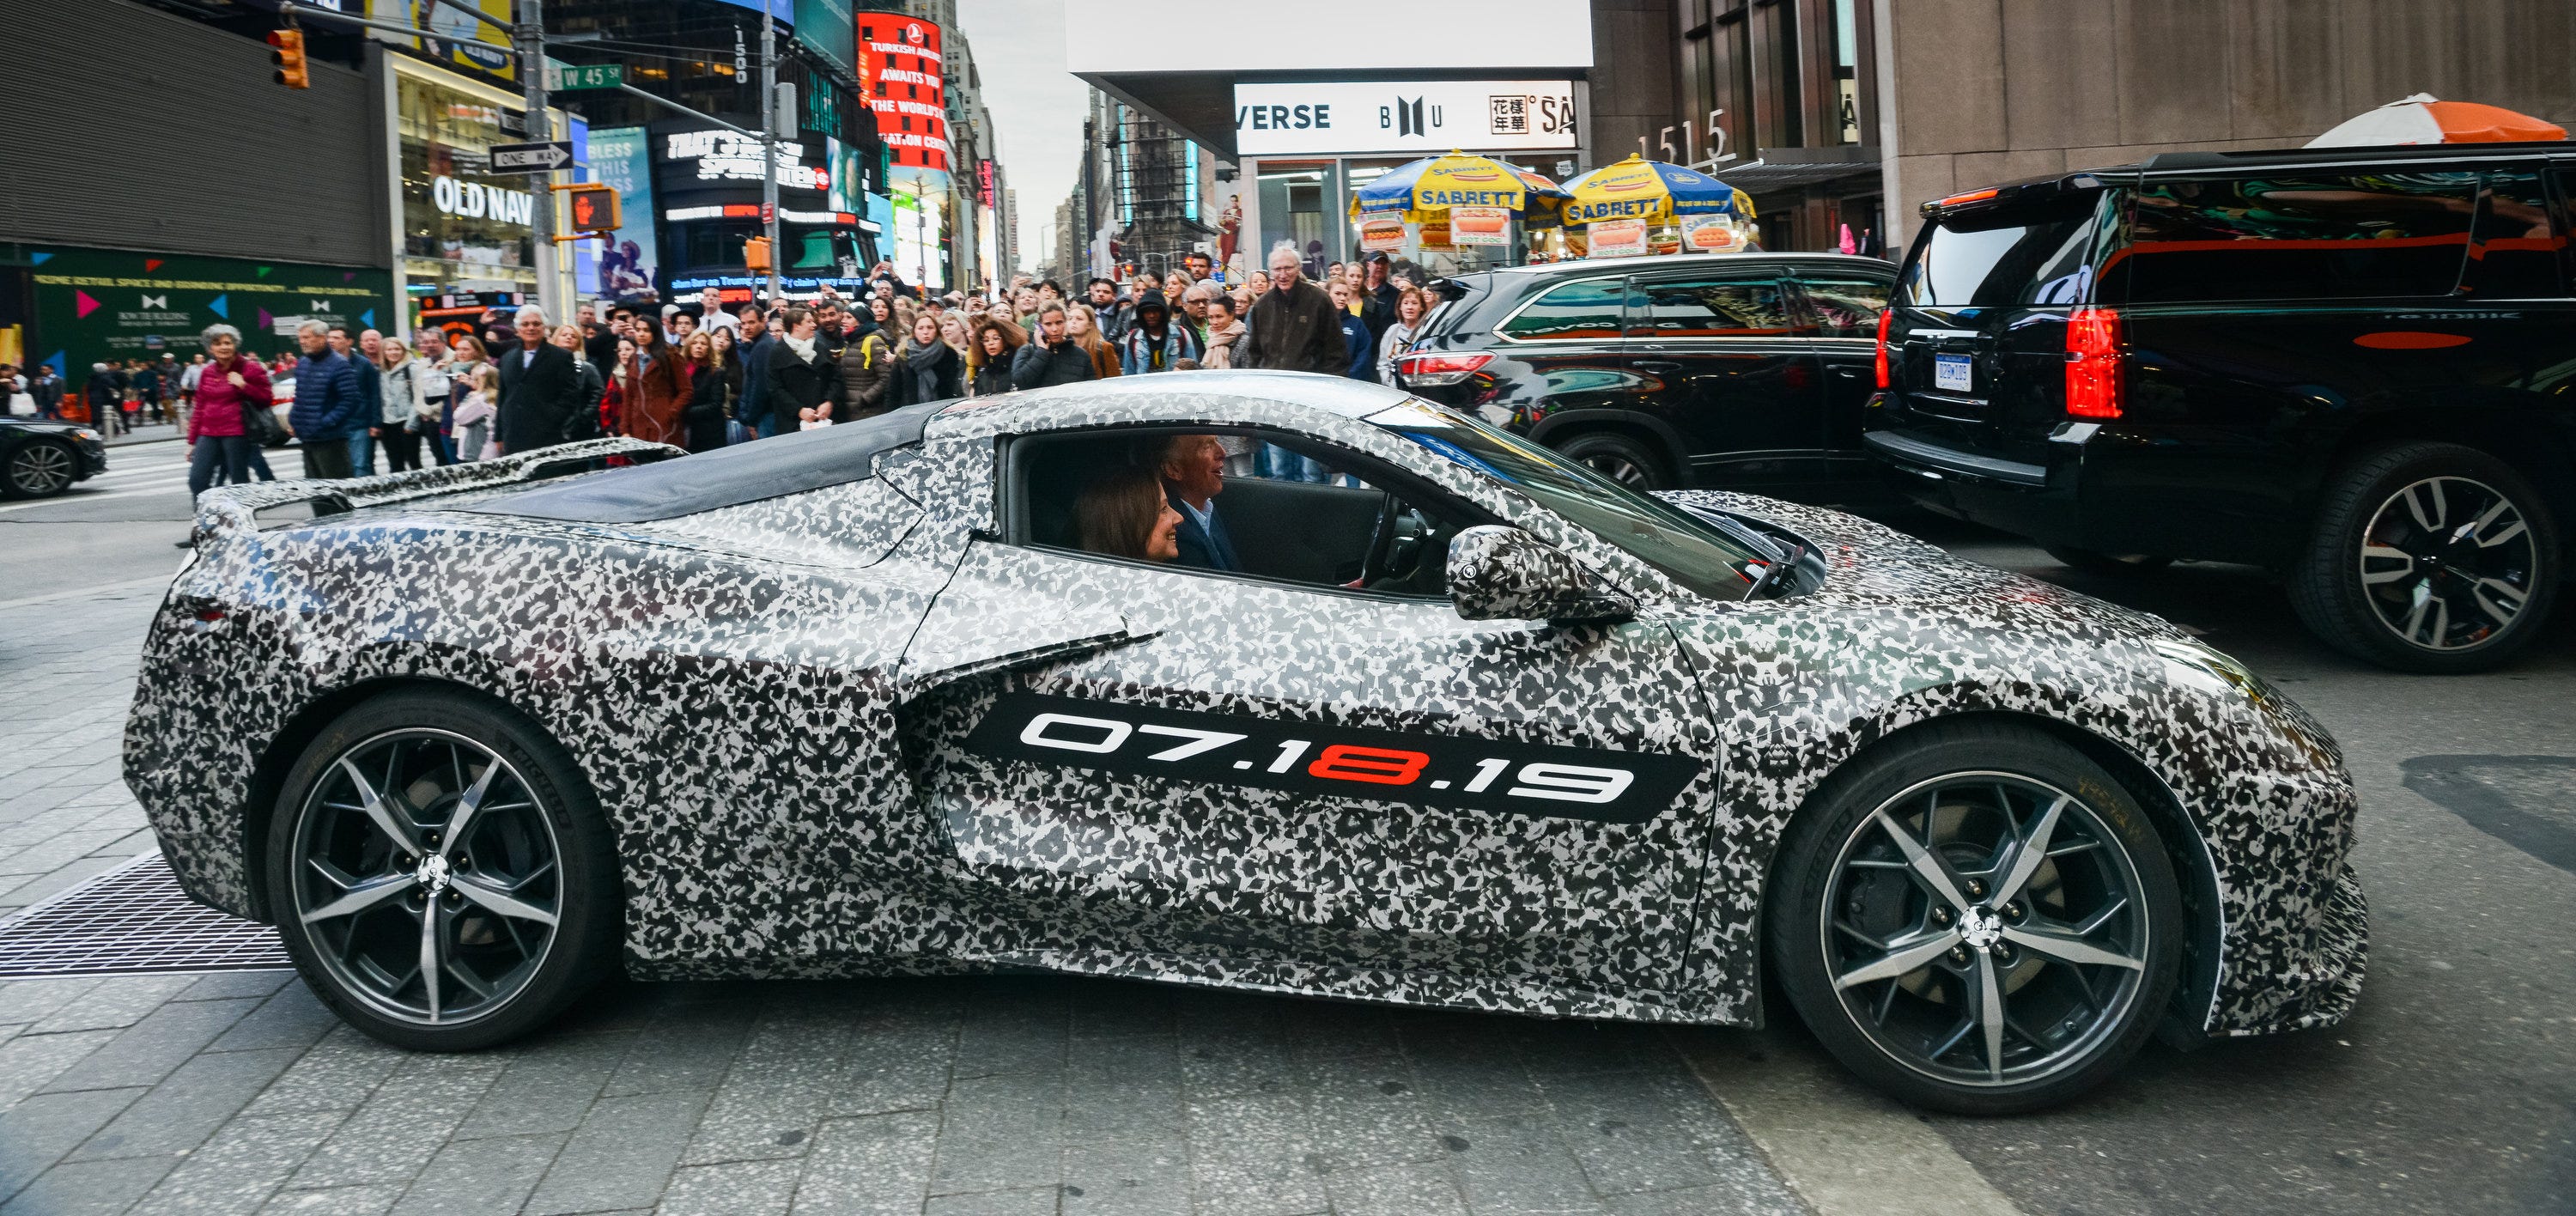 Chevrolet Corvette Chief Engineer Tadge Juechter and General Motors Chairman and CEO Mary Barra drive in a camouflaged next generation Corvette down 7th Avenue near Times Square Thursday, April 11, 2019 in New York City.